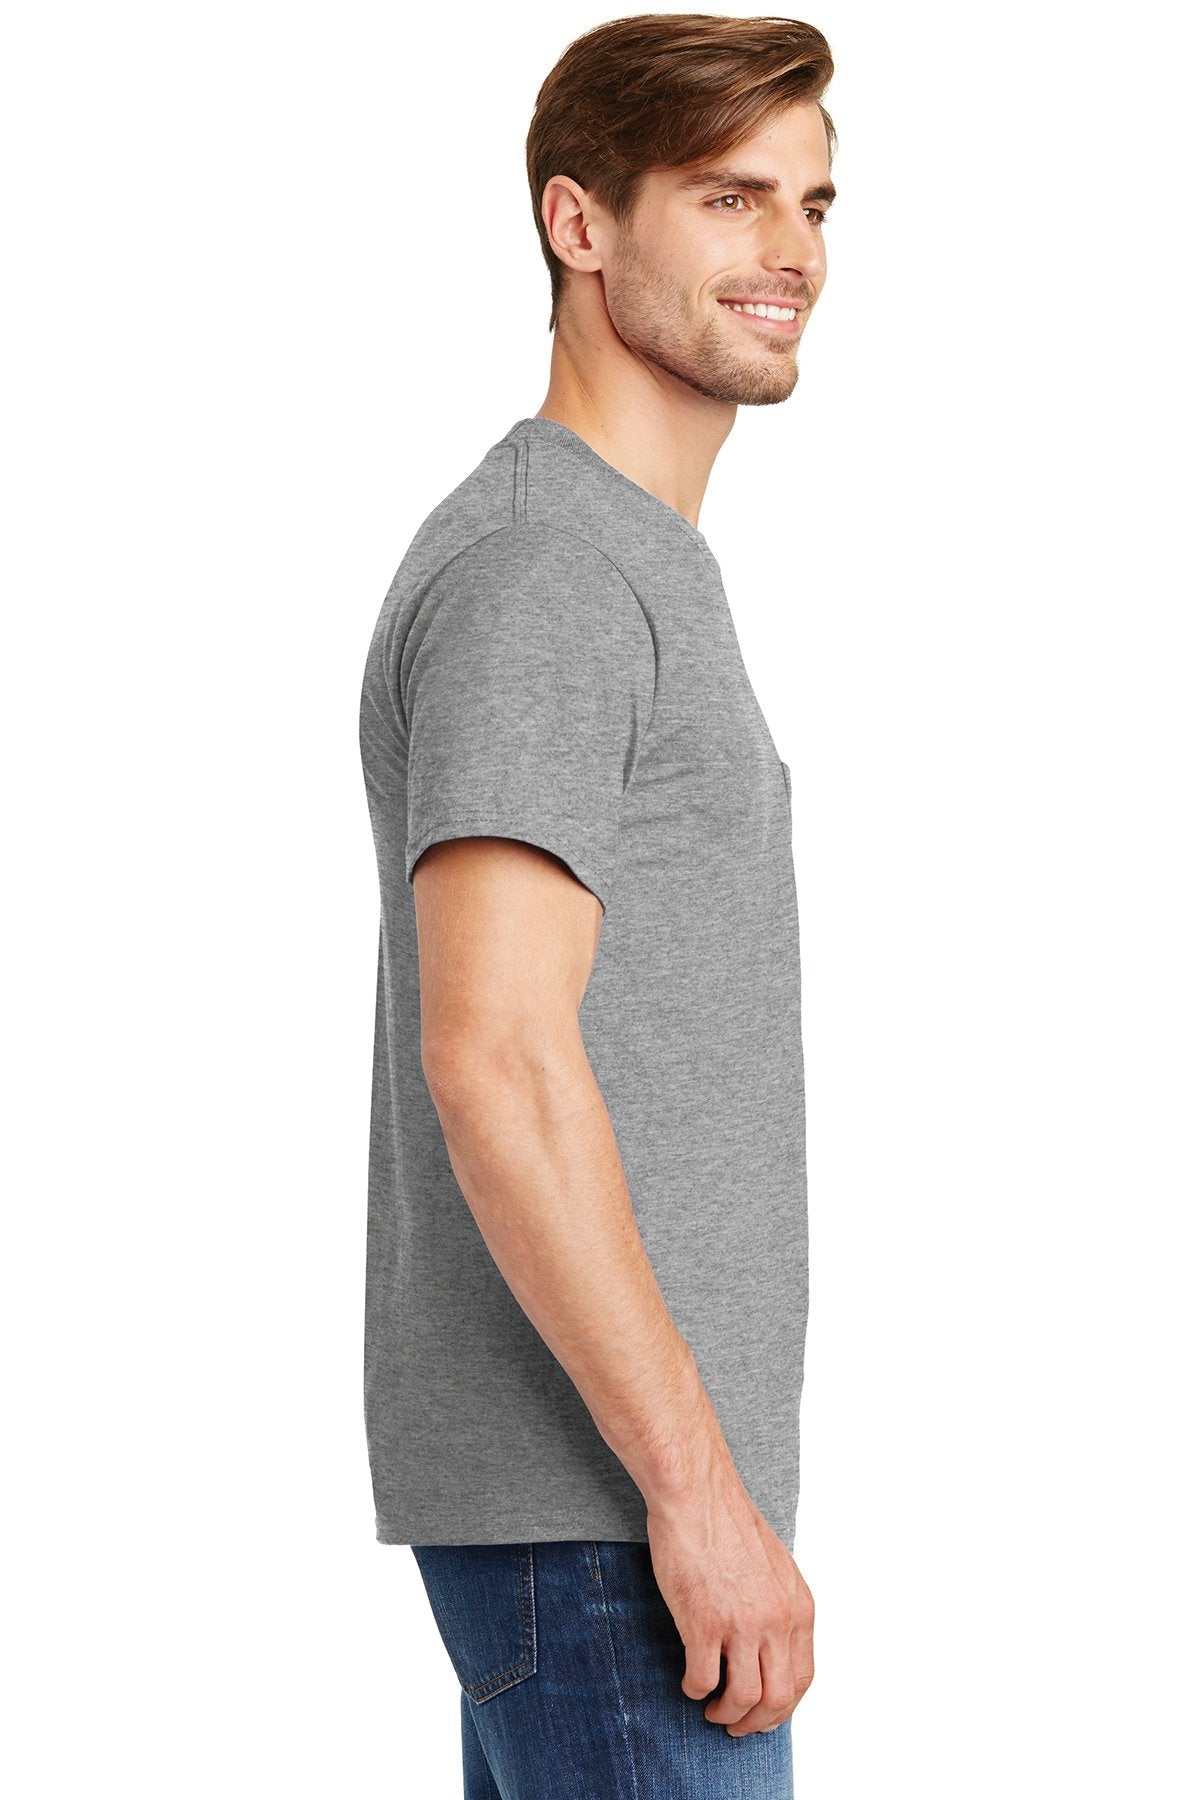 hanes beefy cotton t shirt with pocket 5190 light steel